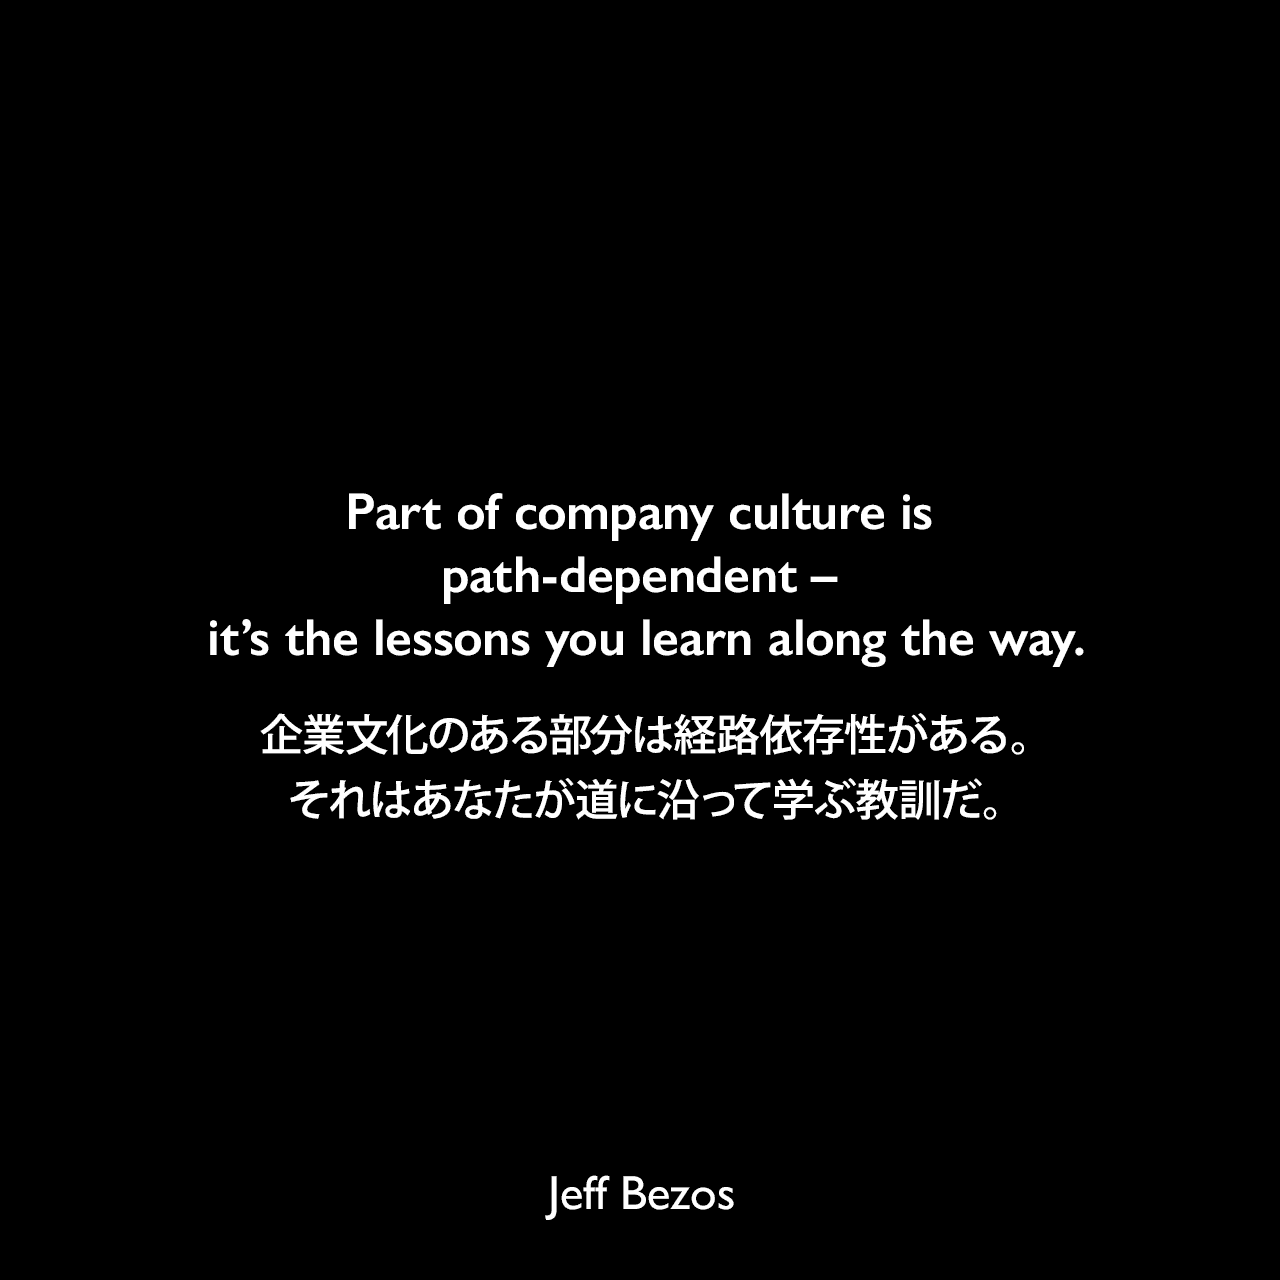 Part of company culture is path-dependent – it’s the lessons you learn along the way.企業文化のある部分は経路依存性がある。それはあなたが道に沿って学ぶ教訓だ。Jeff Bezos